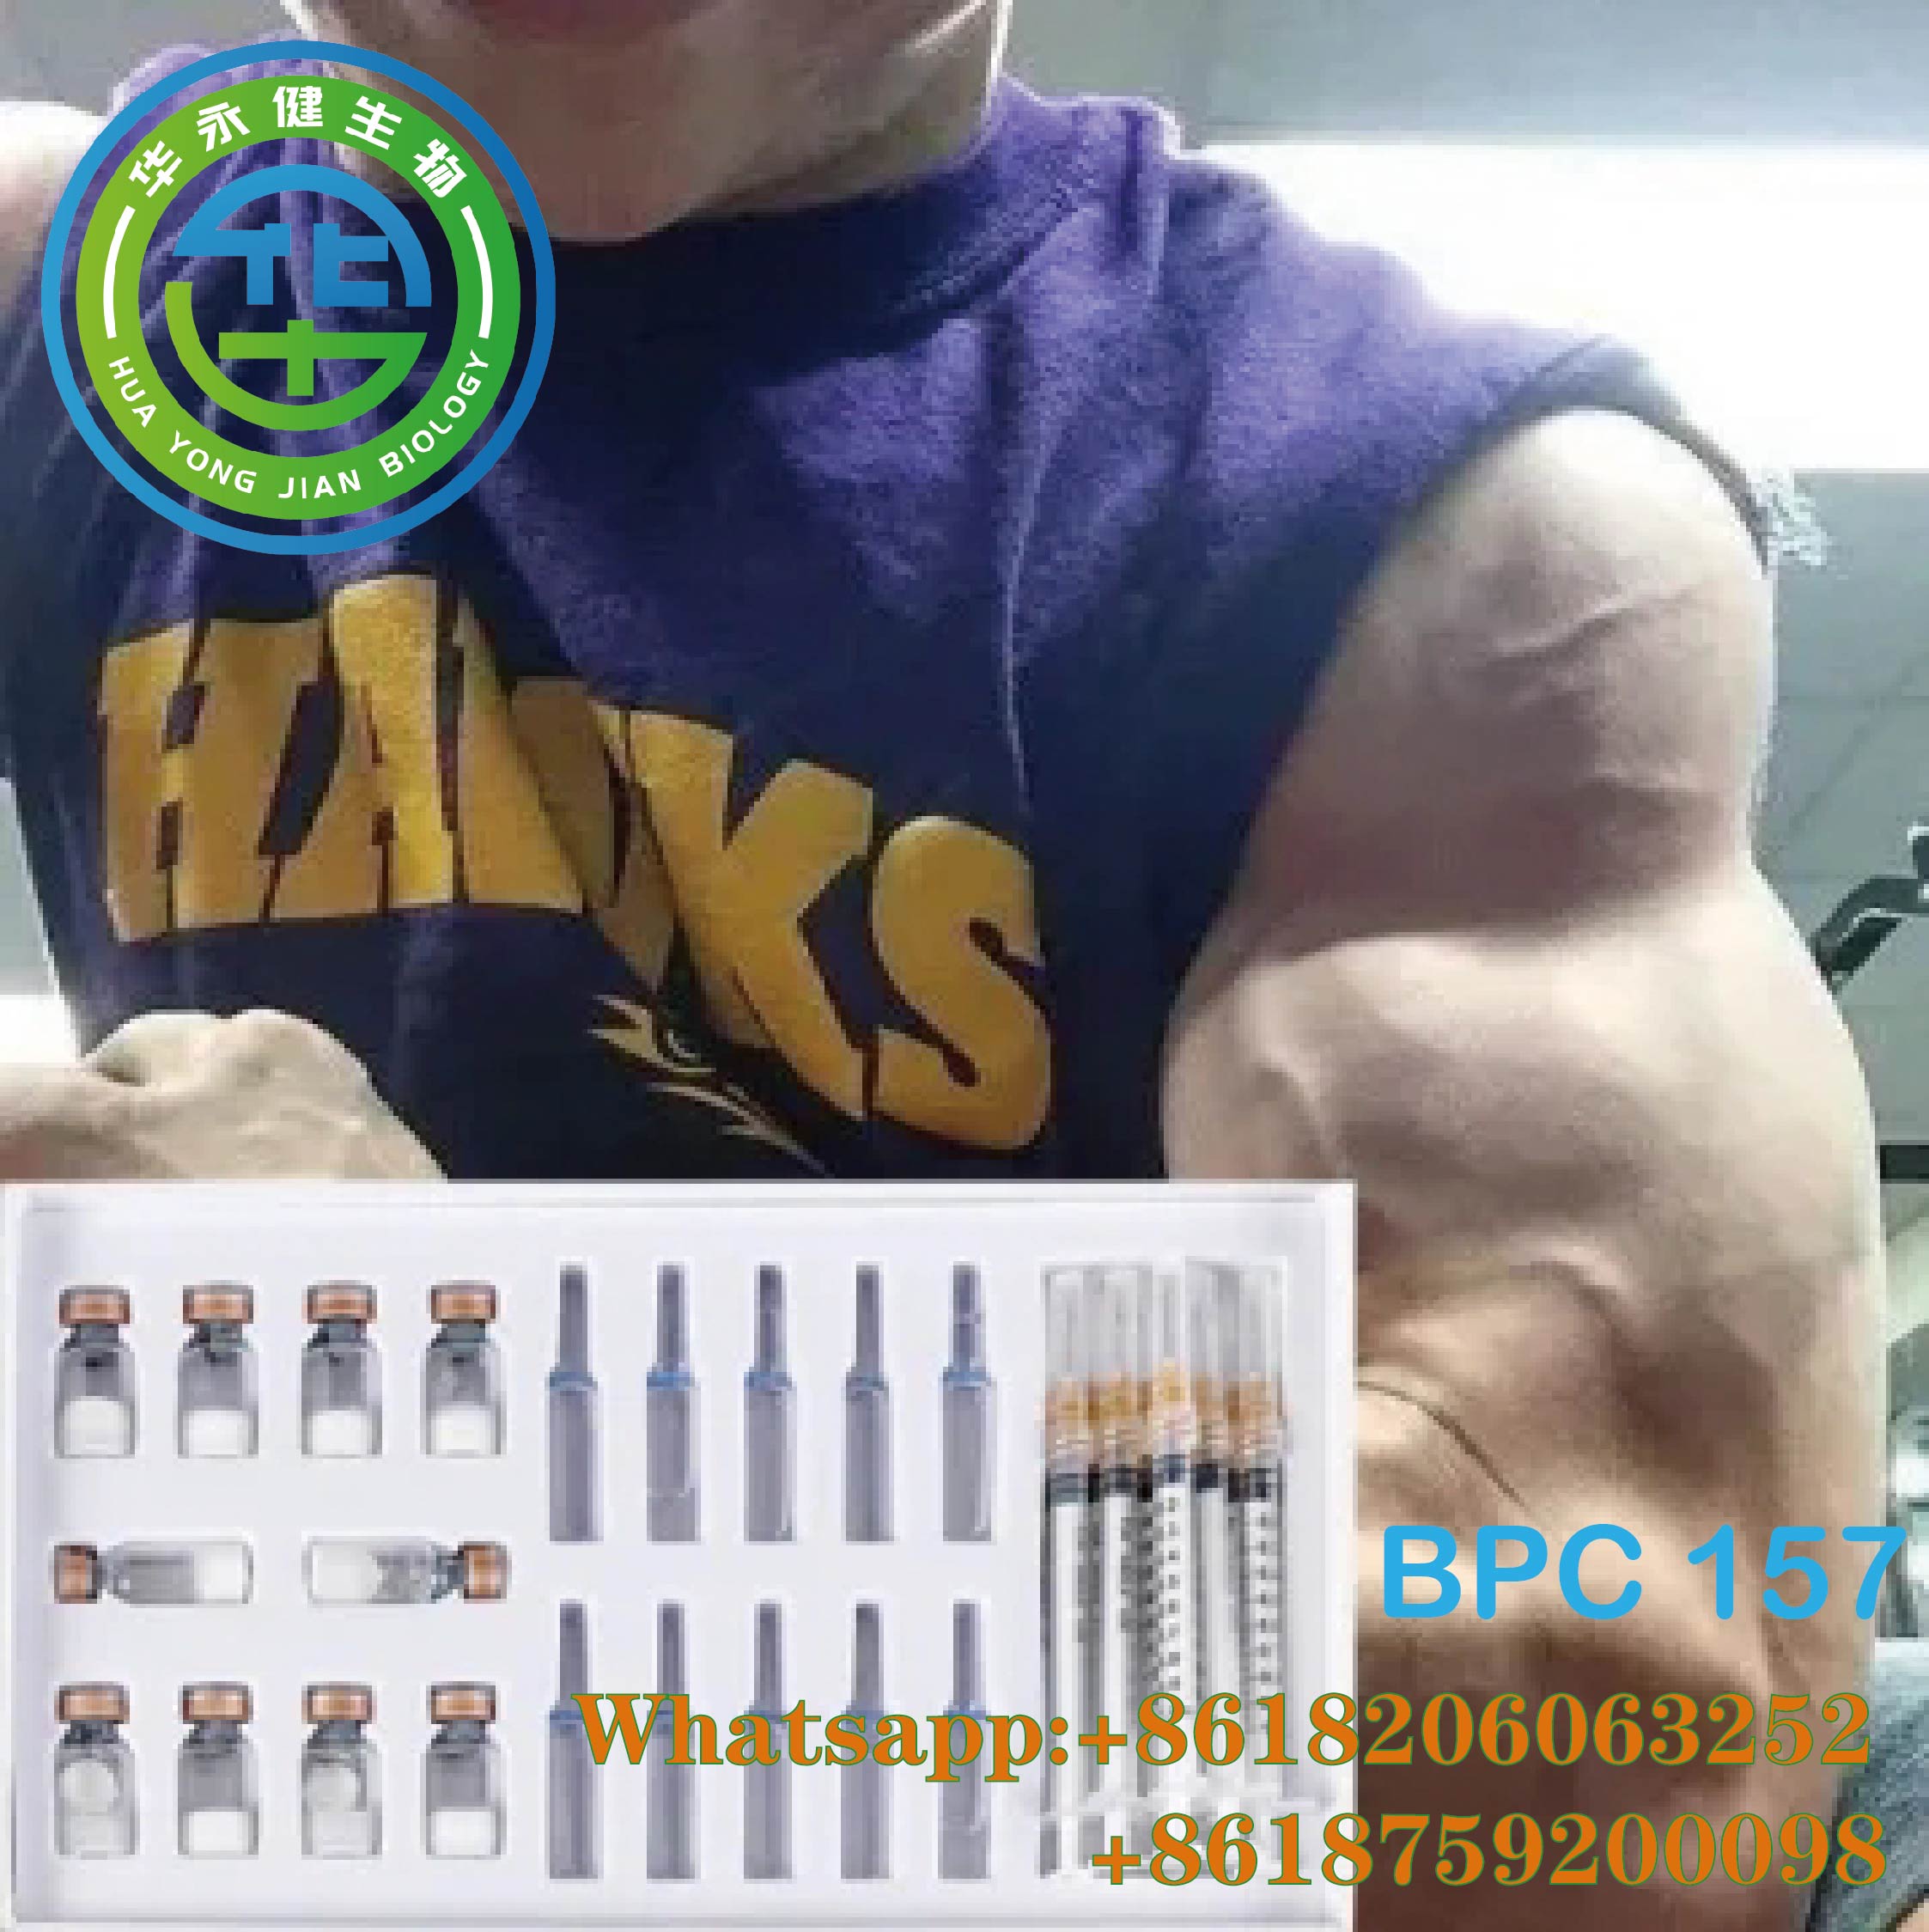 Bpc 157 Peptide Pentadecapeptide for Healing and Production of Collagen